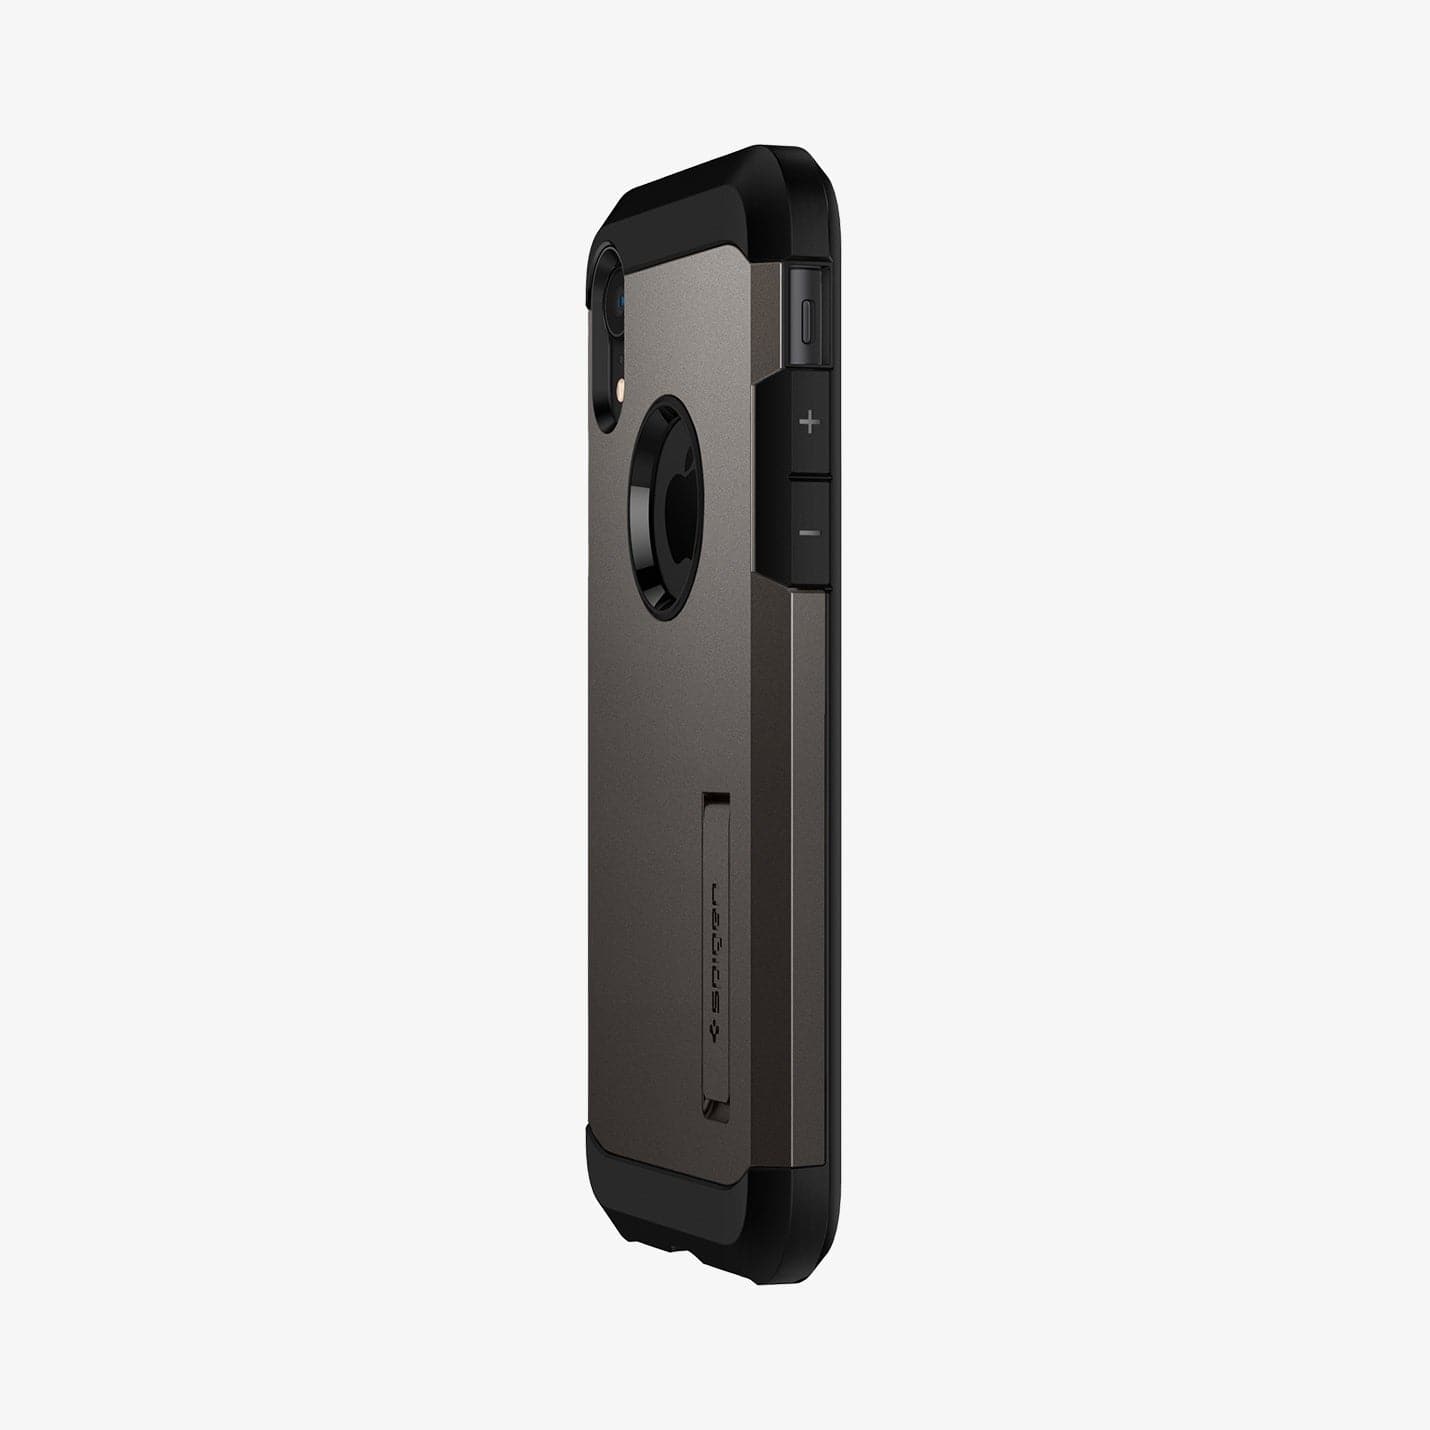 064CS24877 - iPhone XR Case Tough Armor in gunmetal showing the side and partial back